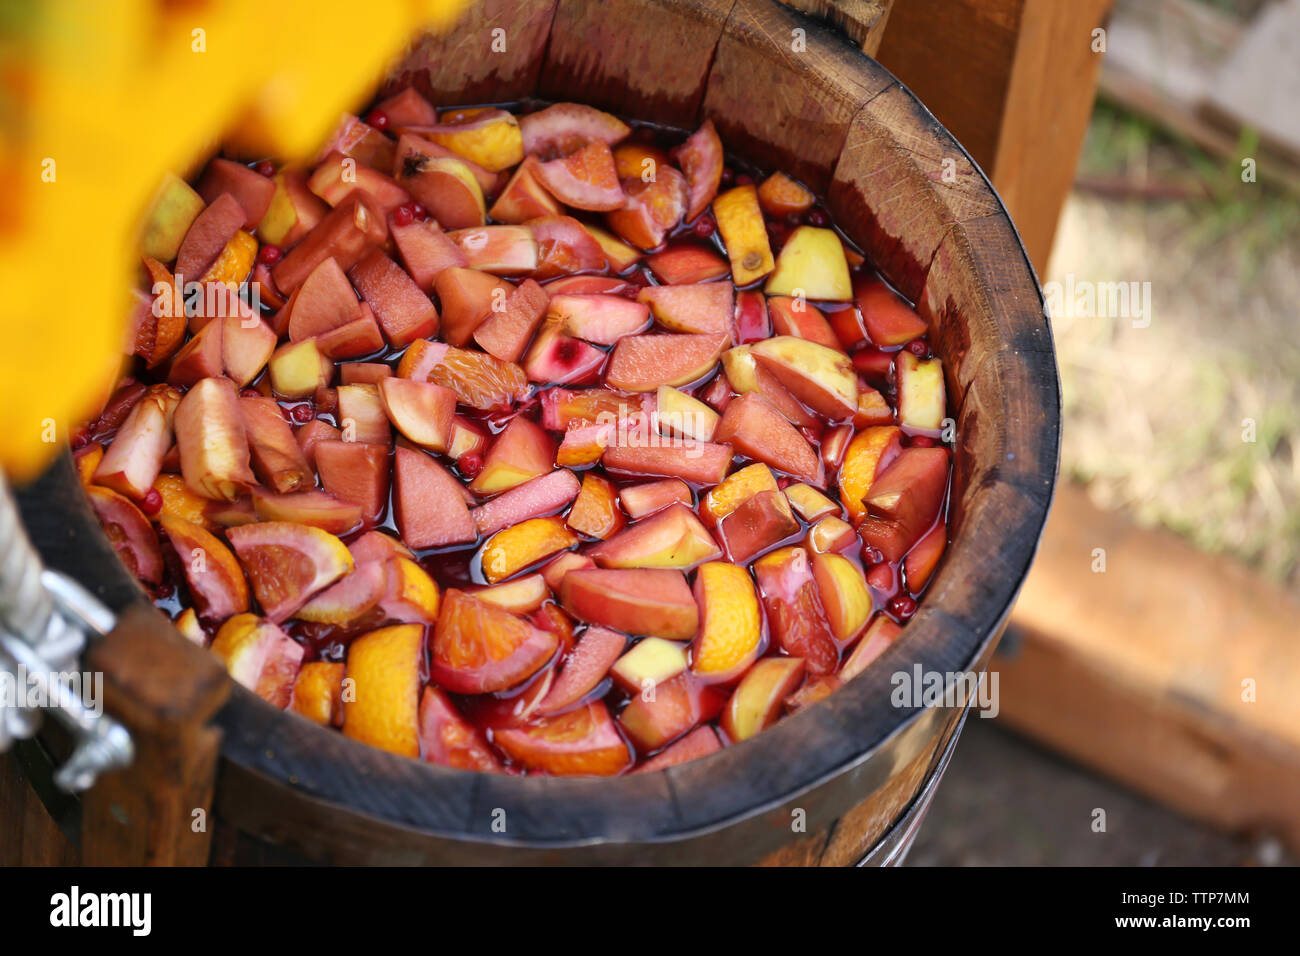 Homemade compote in wooden bucket Stock Photo